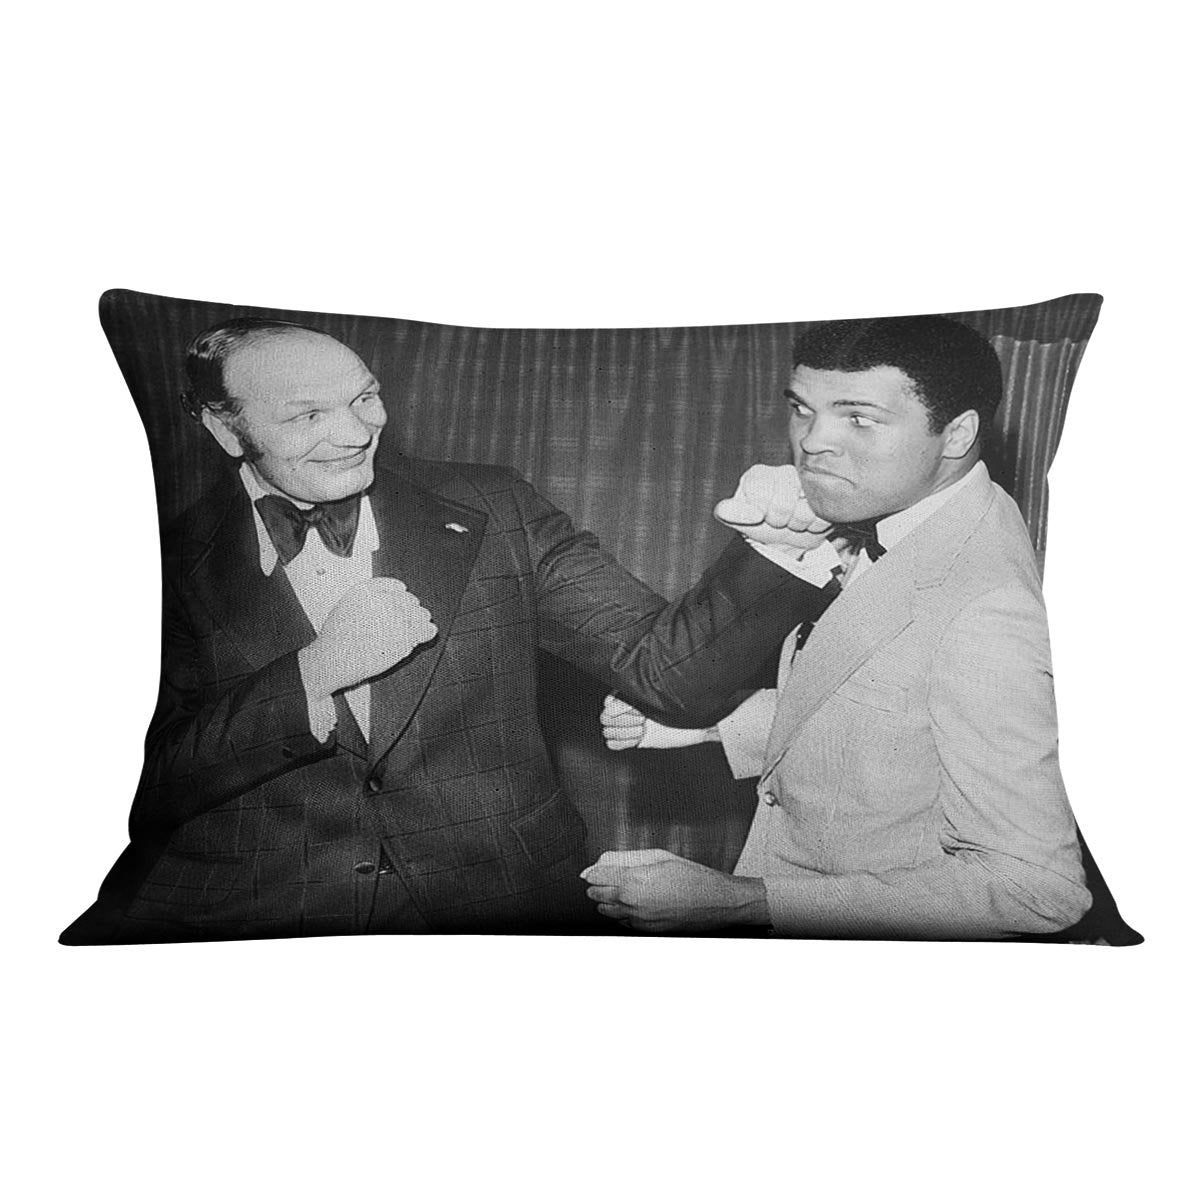 Boxers Henry Cooper and Muhammad Ali Cushion